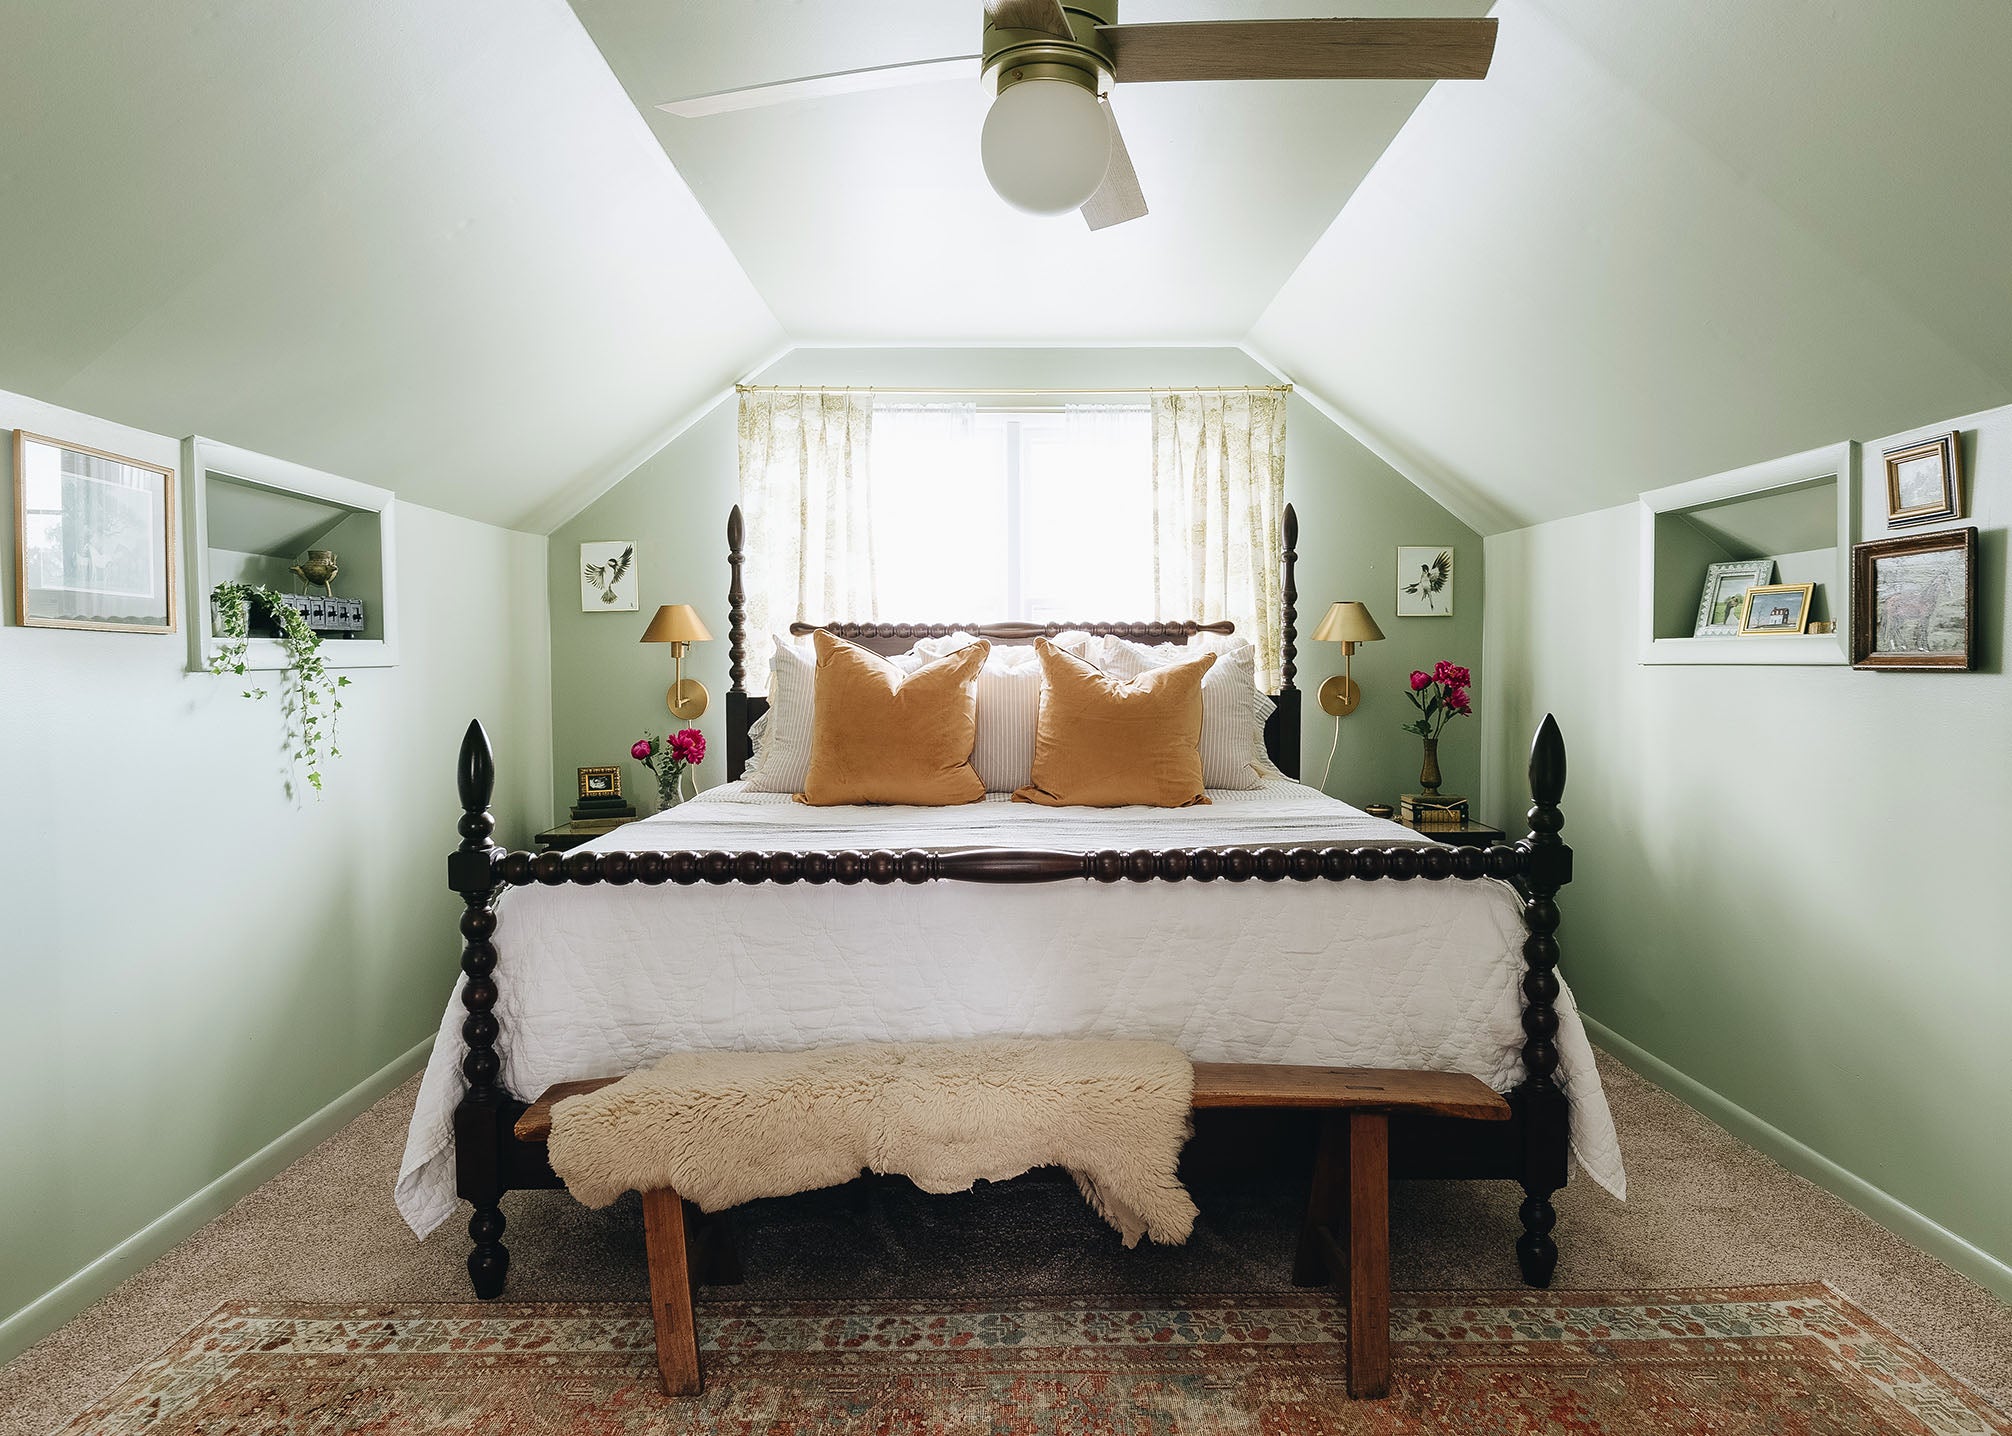 Recreate this cottagecore bedroom with a soft green paint color, like Clare's Dirty Martini.